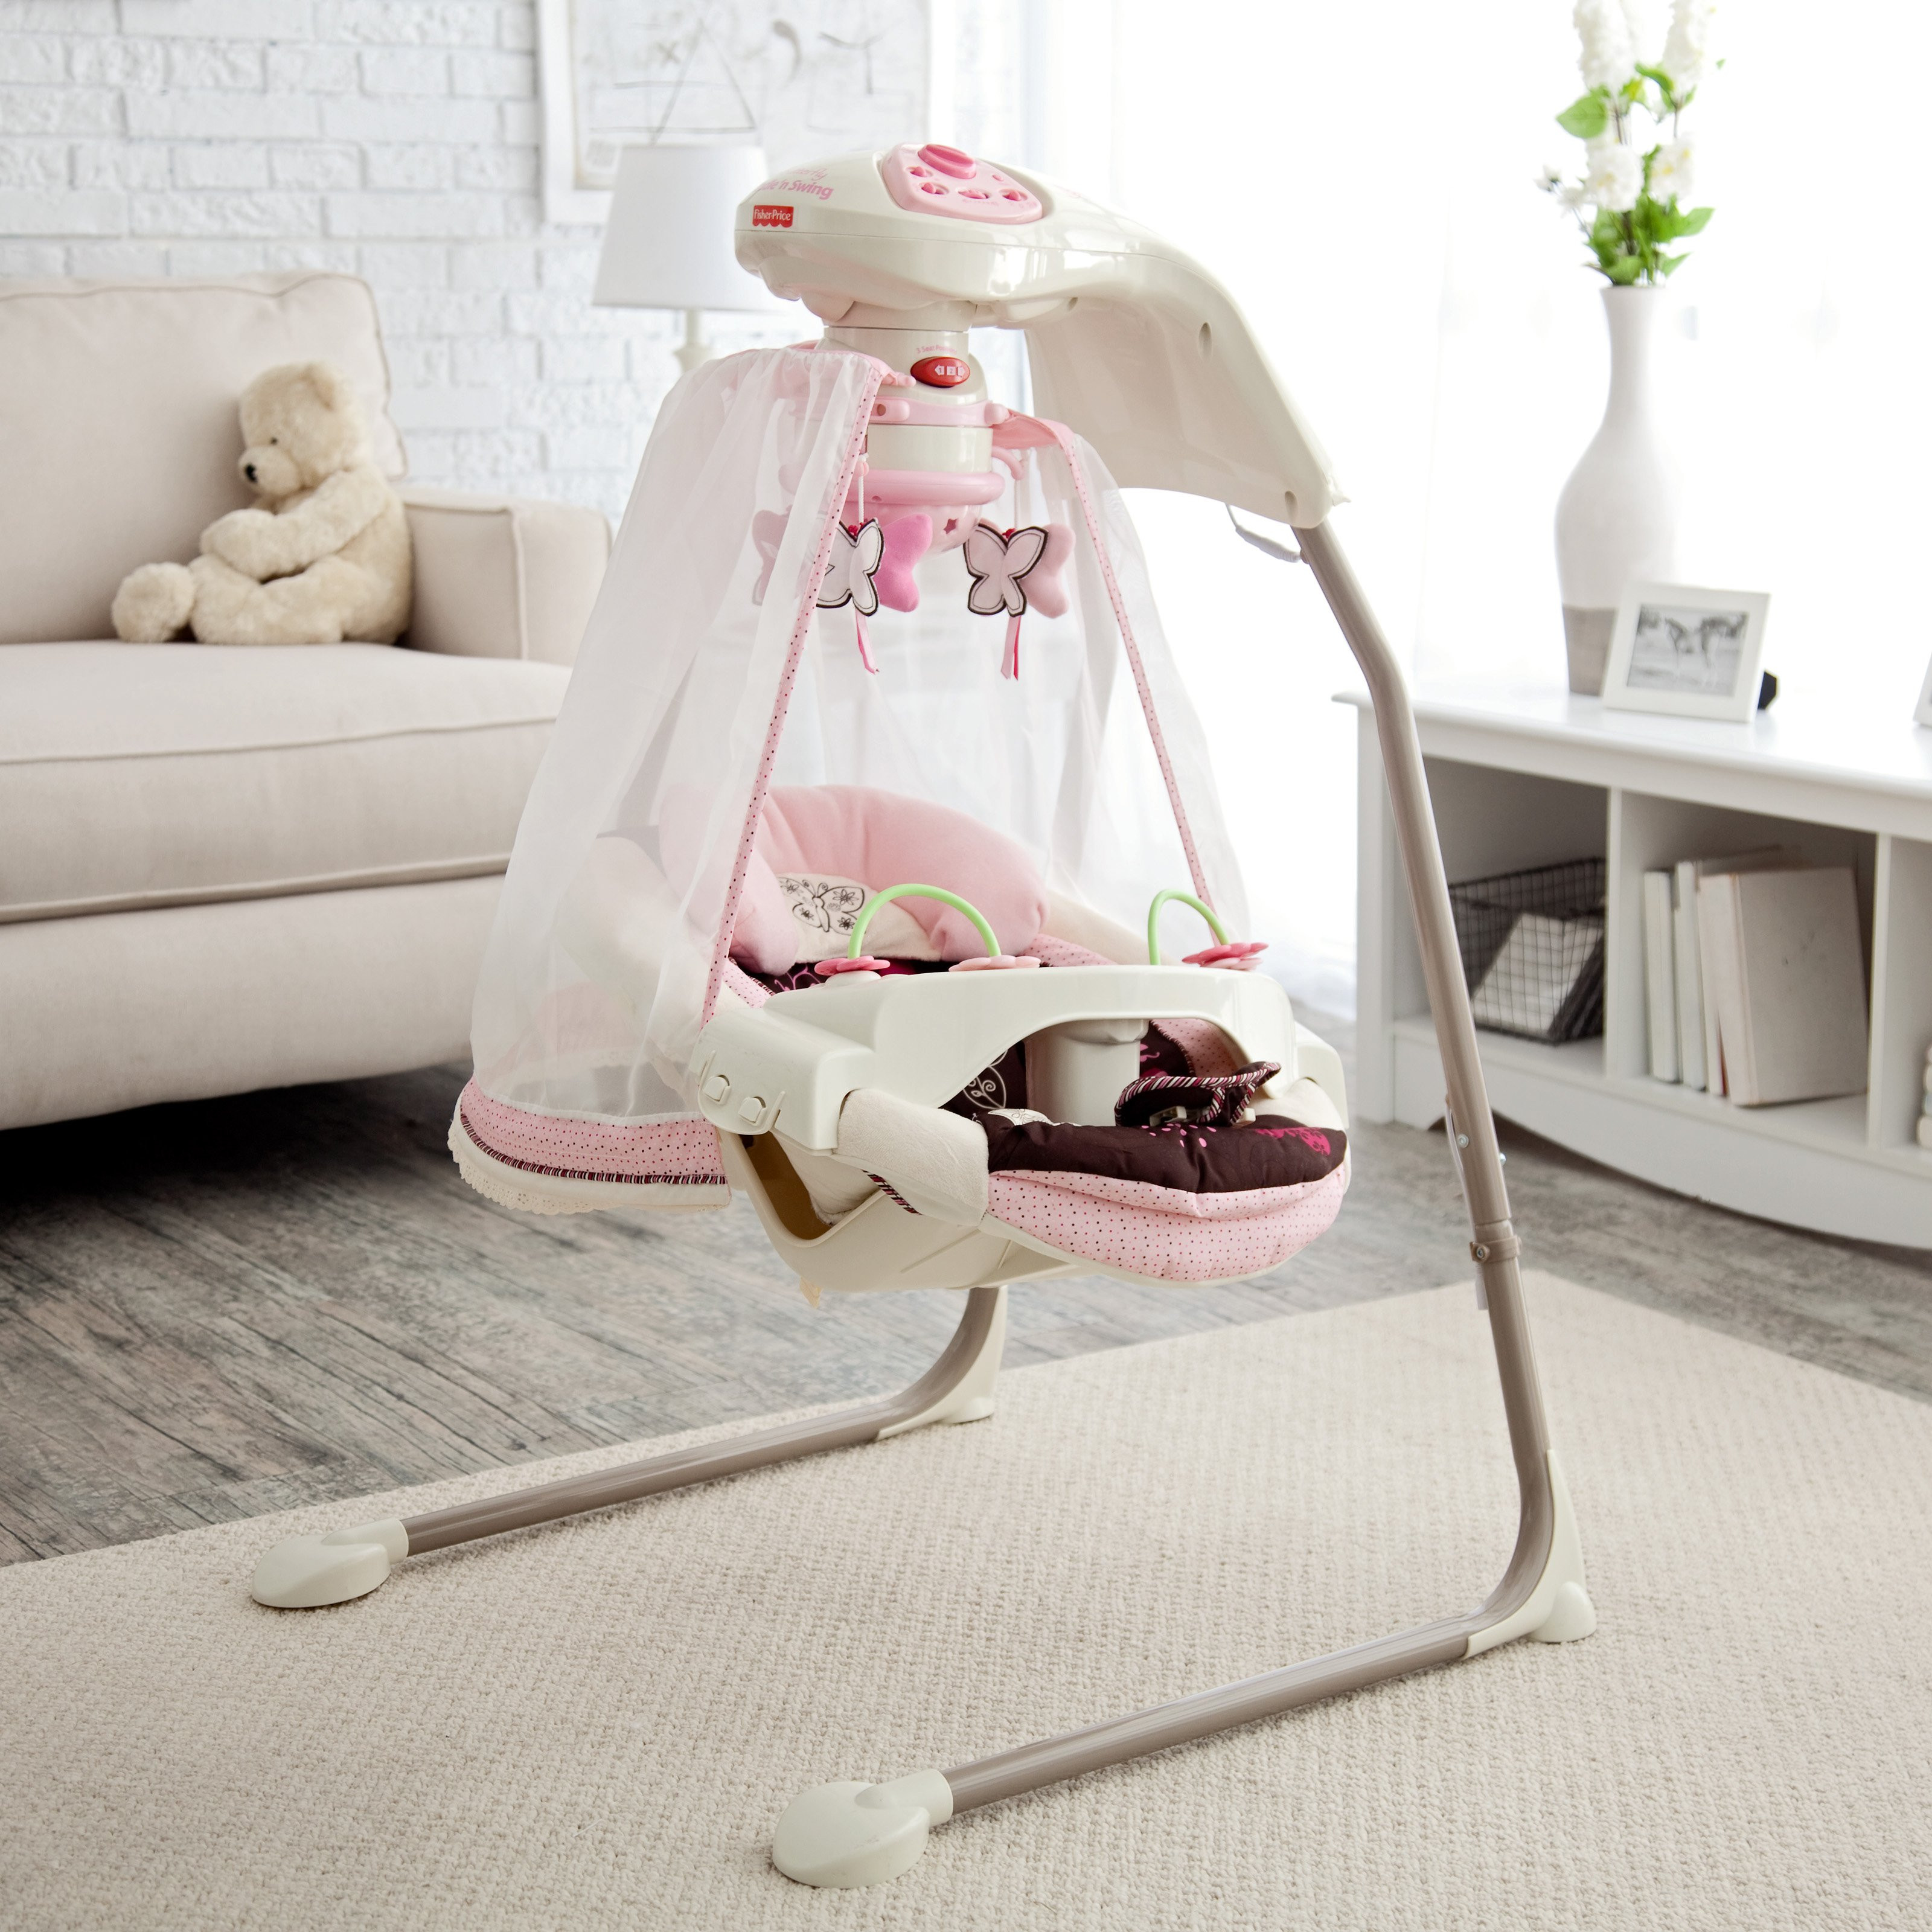 Best ideas about Best Baby Swing
. Save or Pin Best Baby Swings Reviews → pare NOW Now.